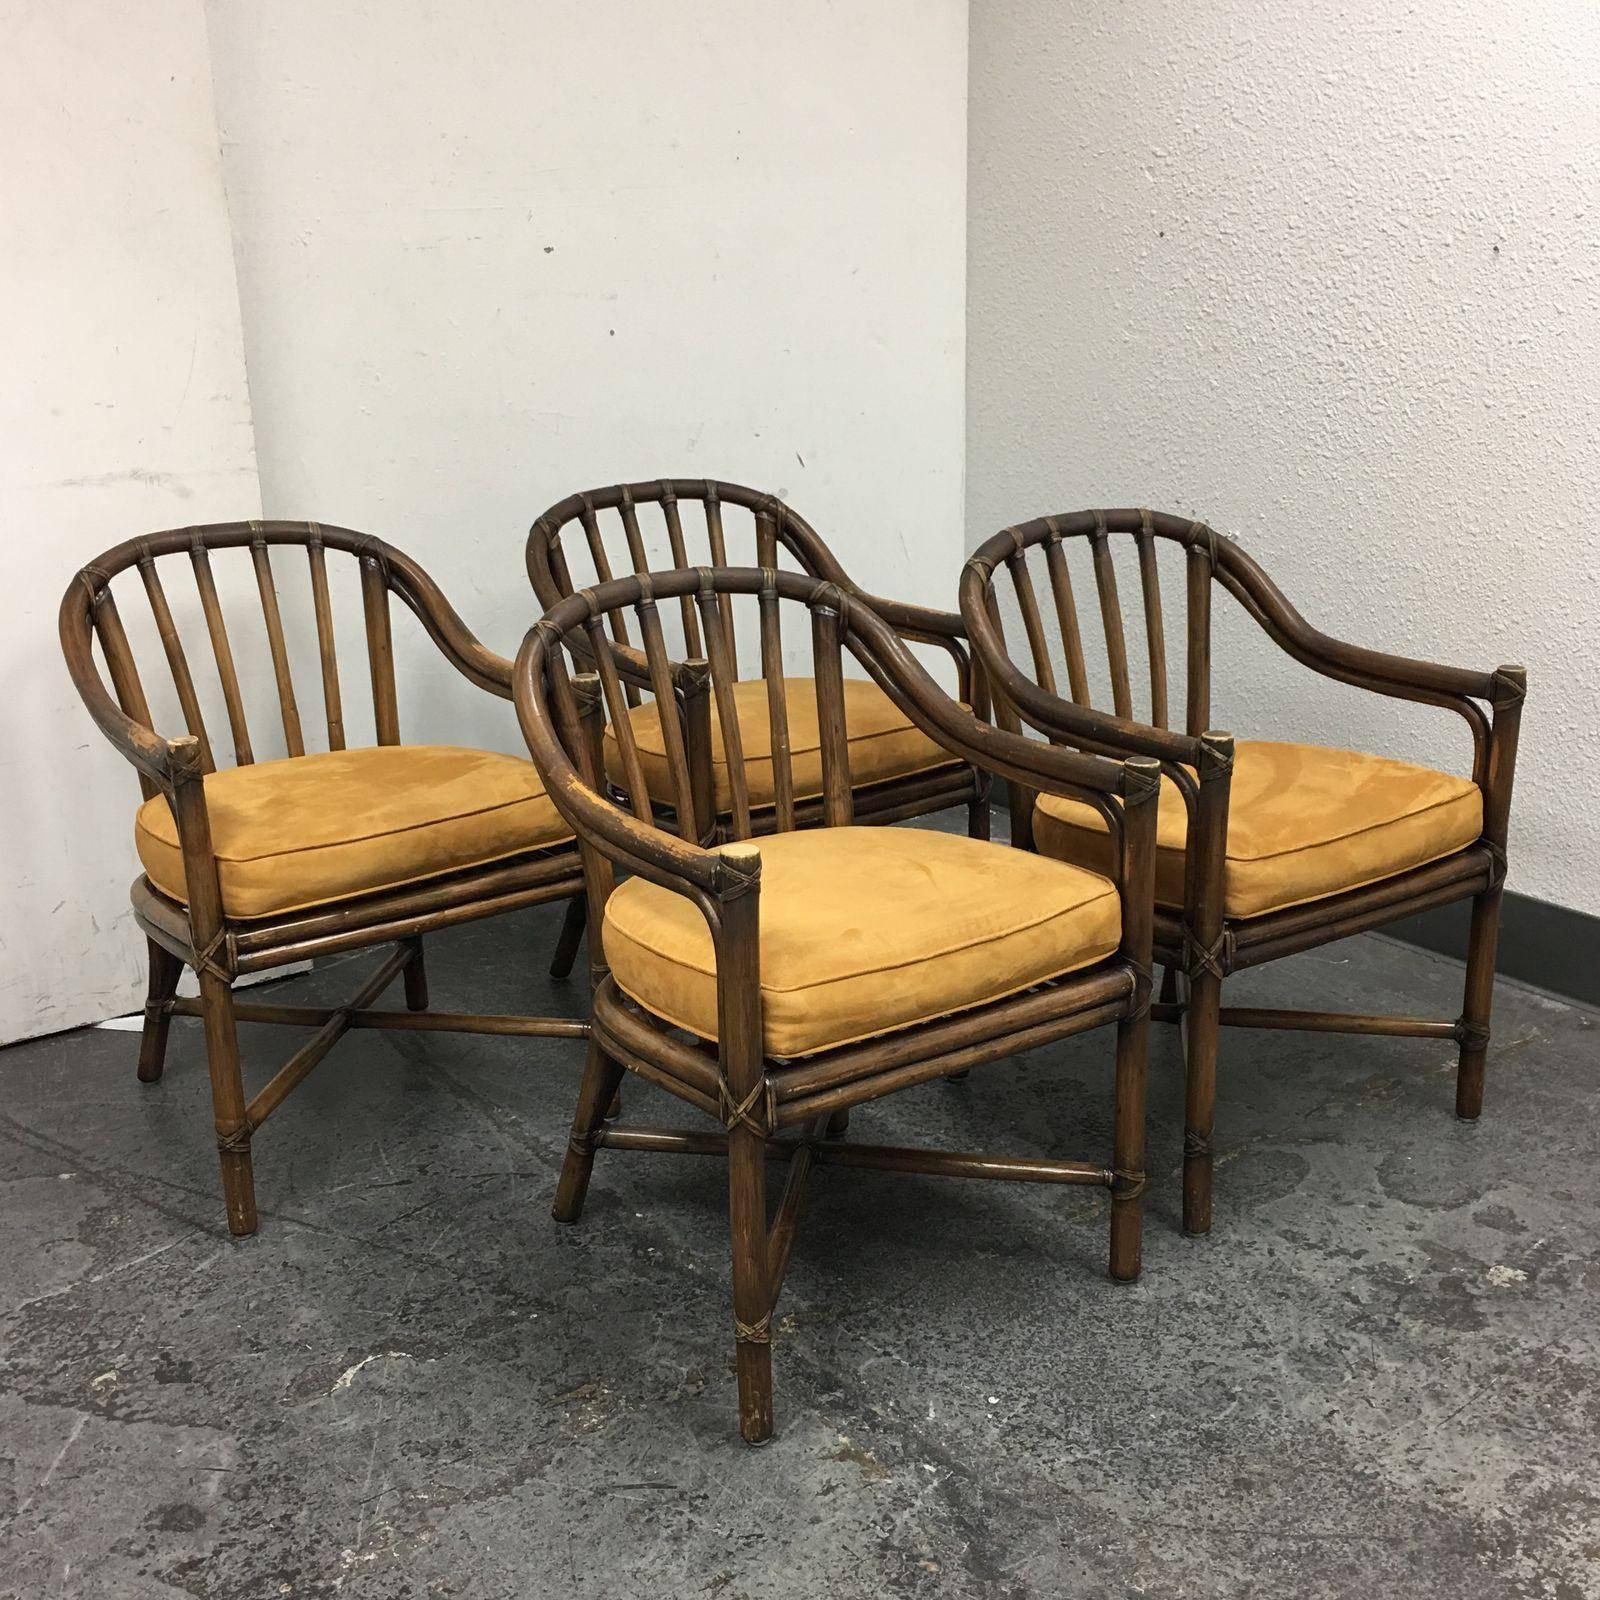 A set of four bamboo frame McGuire chairs. A Classic barrel back bamboo frame with a leather wrapped. The bamboo and leather shows distressed which add the characteristics to the beauty that McGuire can continue to withhold, no matter how old the